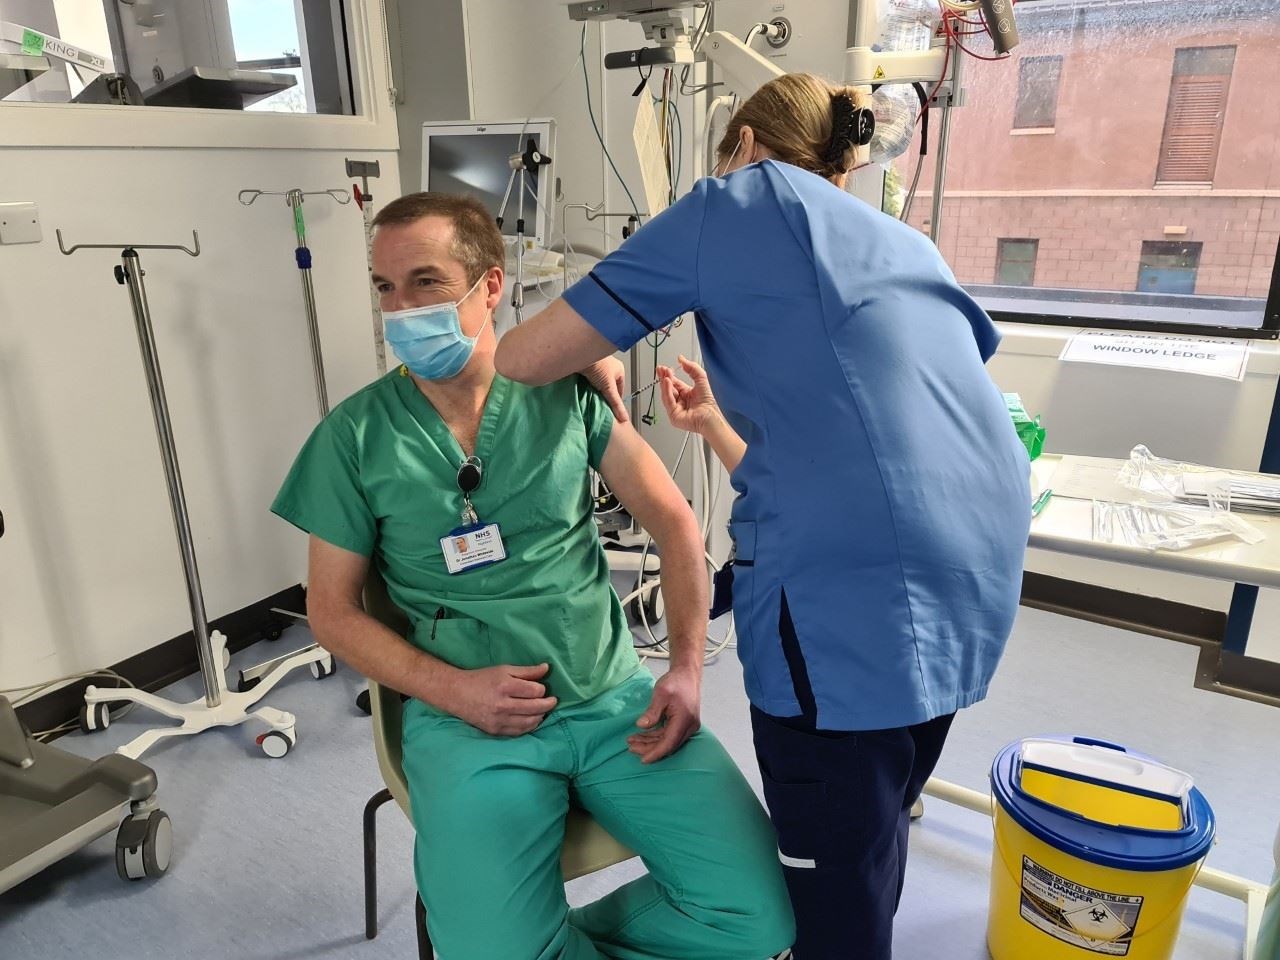 Dr Jonathan Whiteside, clinical lead for critical care with NHS Highland, was the first person to be vaccinated within the NHS Highland area. The rollout of the programme is now eagerly awaited amid the latest lockdown.